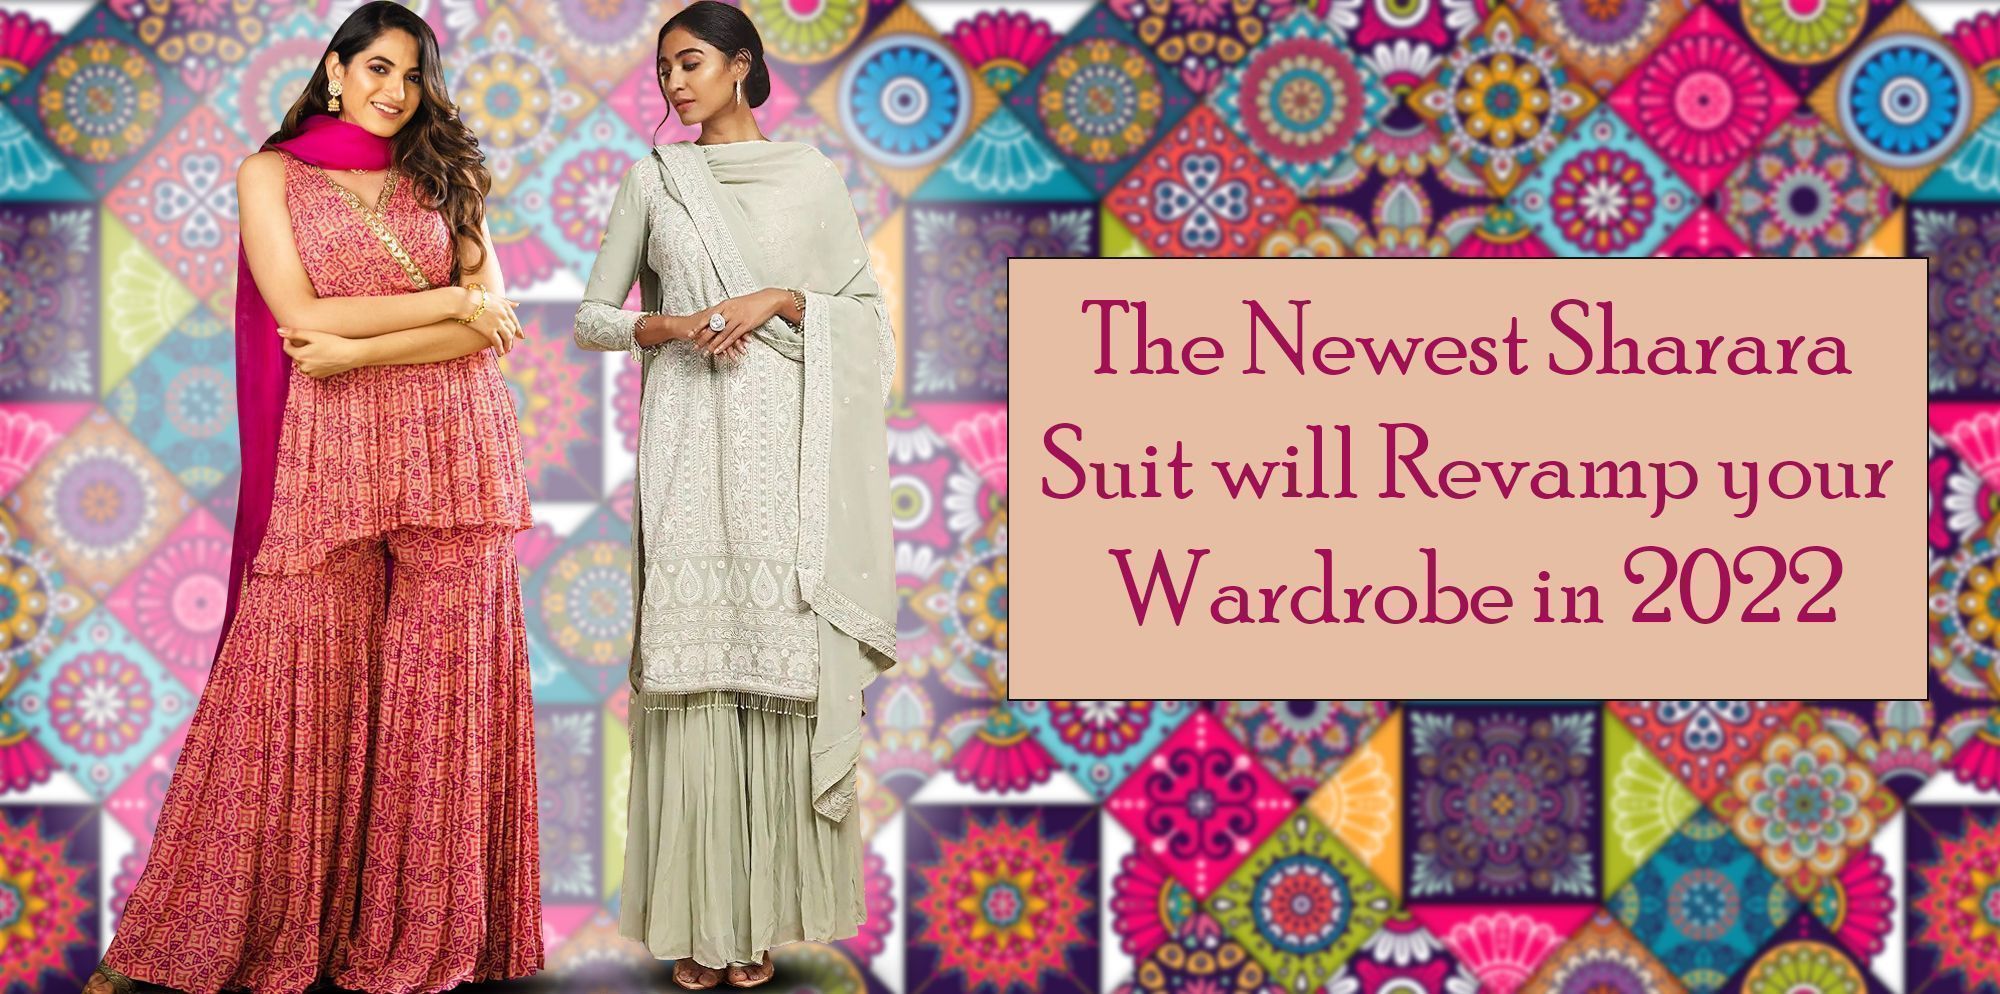 The Newest Sharara Suit will Revamp your Wardrobe in 2022